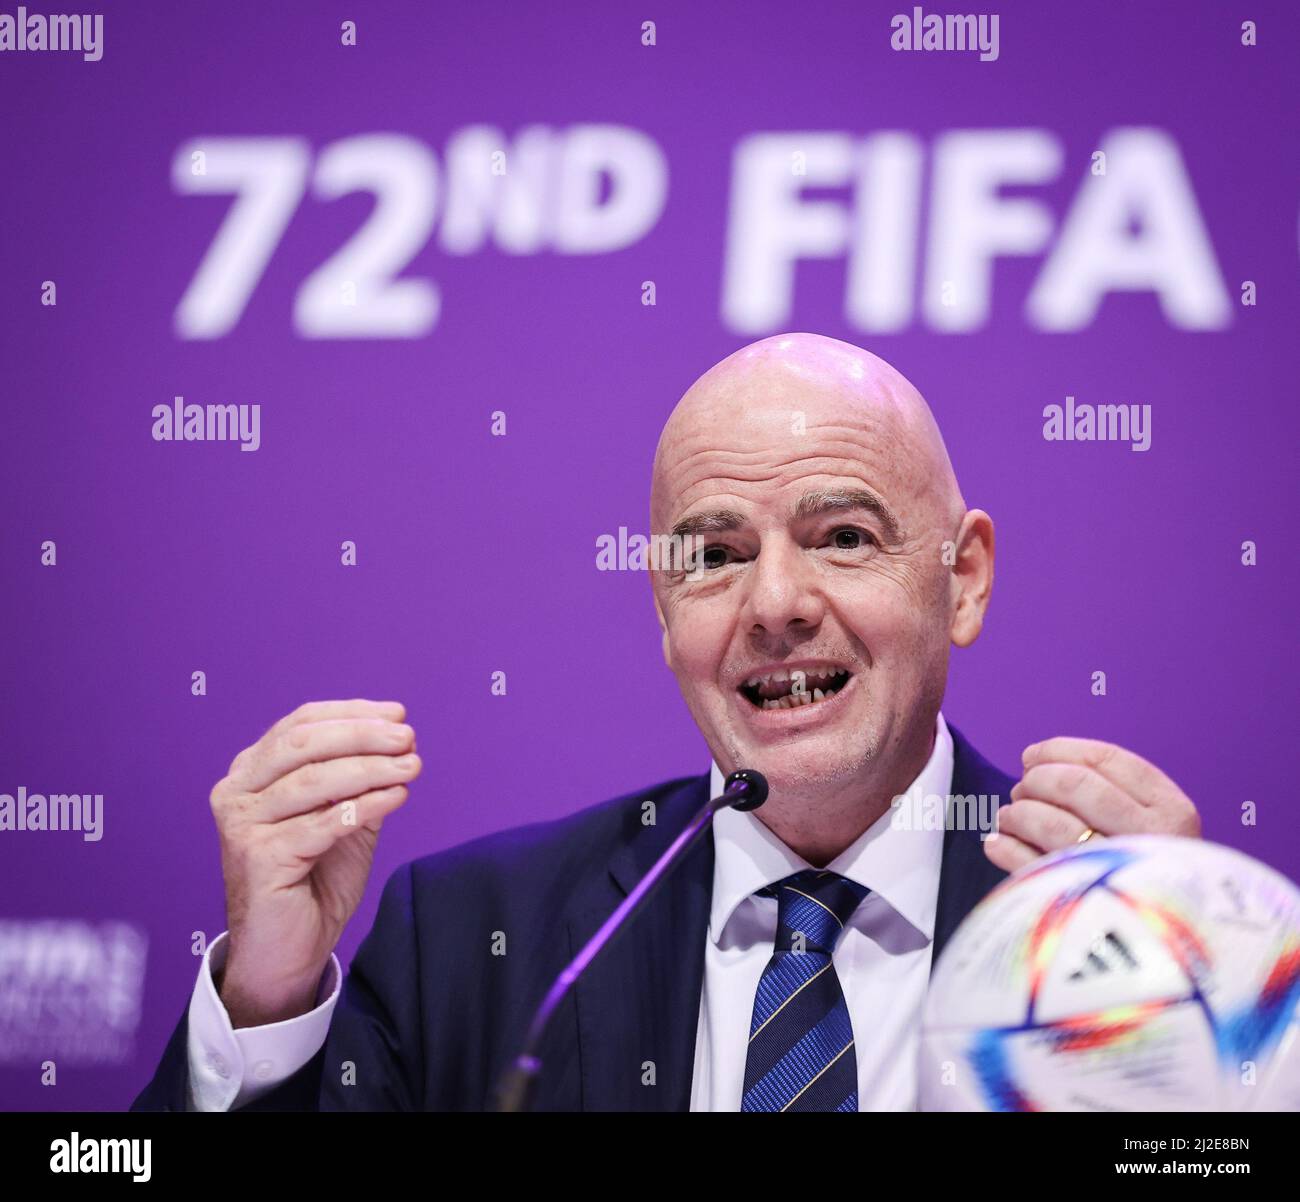 Doha, Qatar. 31st Mar, 2022. Soccer: FIFA Congress 2022. Fifa President Gianni Infantino speaks at a press conference after the Fifa Congress at the Doha Exhibition & Convention Center (DECC). In front of him on the podium is the official match ball "Al Rihla" ("the journey" in Arabic) for the 2022 World Cup in Qatar. Credit: Christian Charisius/dpa/Alamy Live News Stock Photo